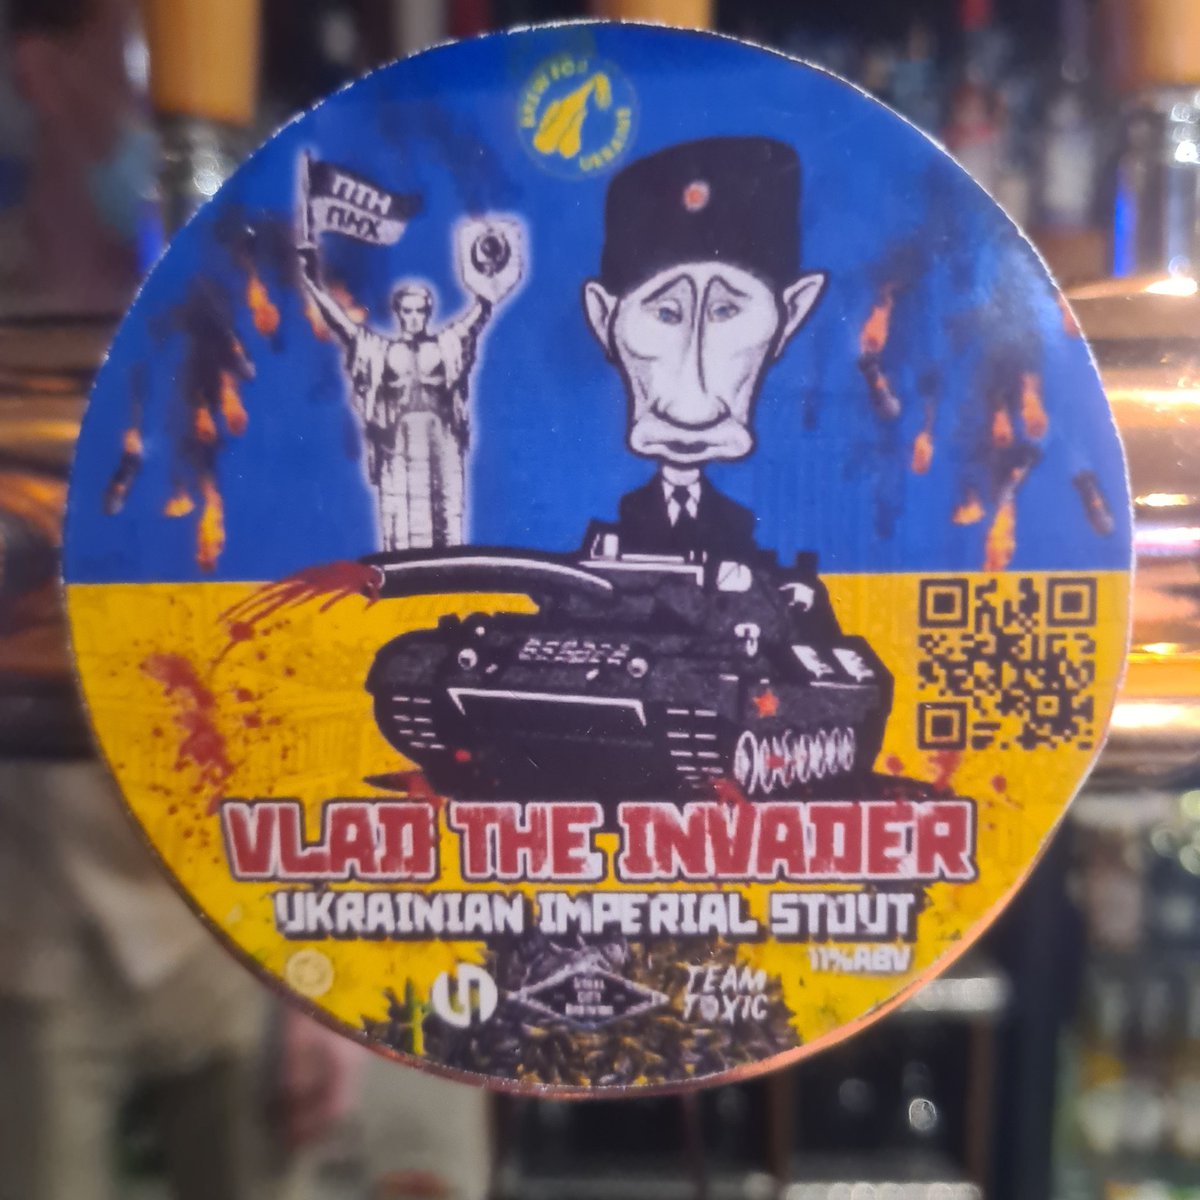 Fresh on tap @Steelcitybrew X Lost Industry X @TeamToxicLtd Vlad the Invader 11.8% Ukrainian Imperial Stout brewed with demerara and muscovado sugars and Ukrainian sunflower seeds. All brewery profits donated to Ukrainian aid charities 🇺🇦 🇺🇦 🇺🇦 #craftbeer